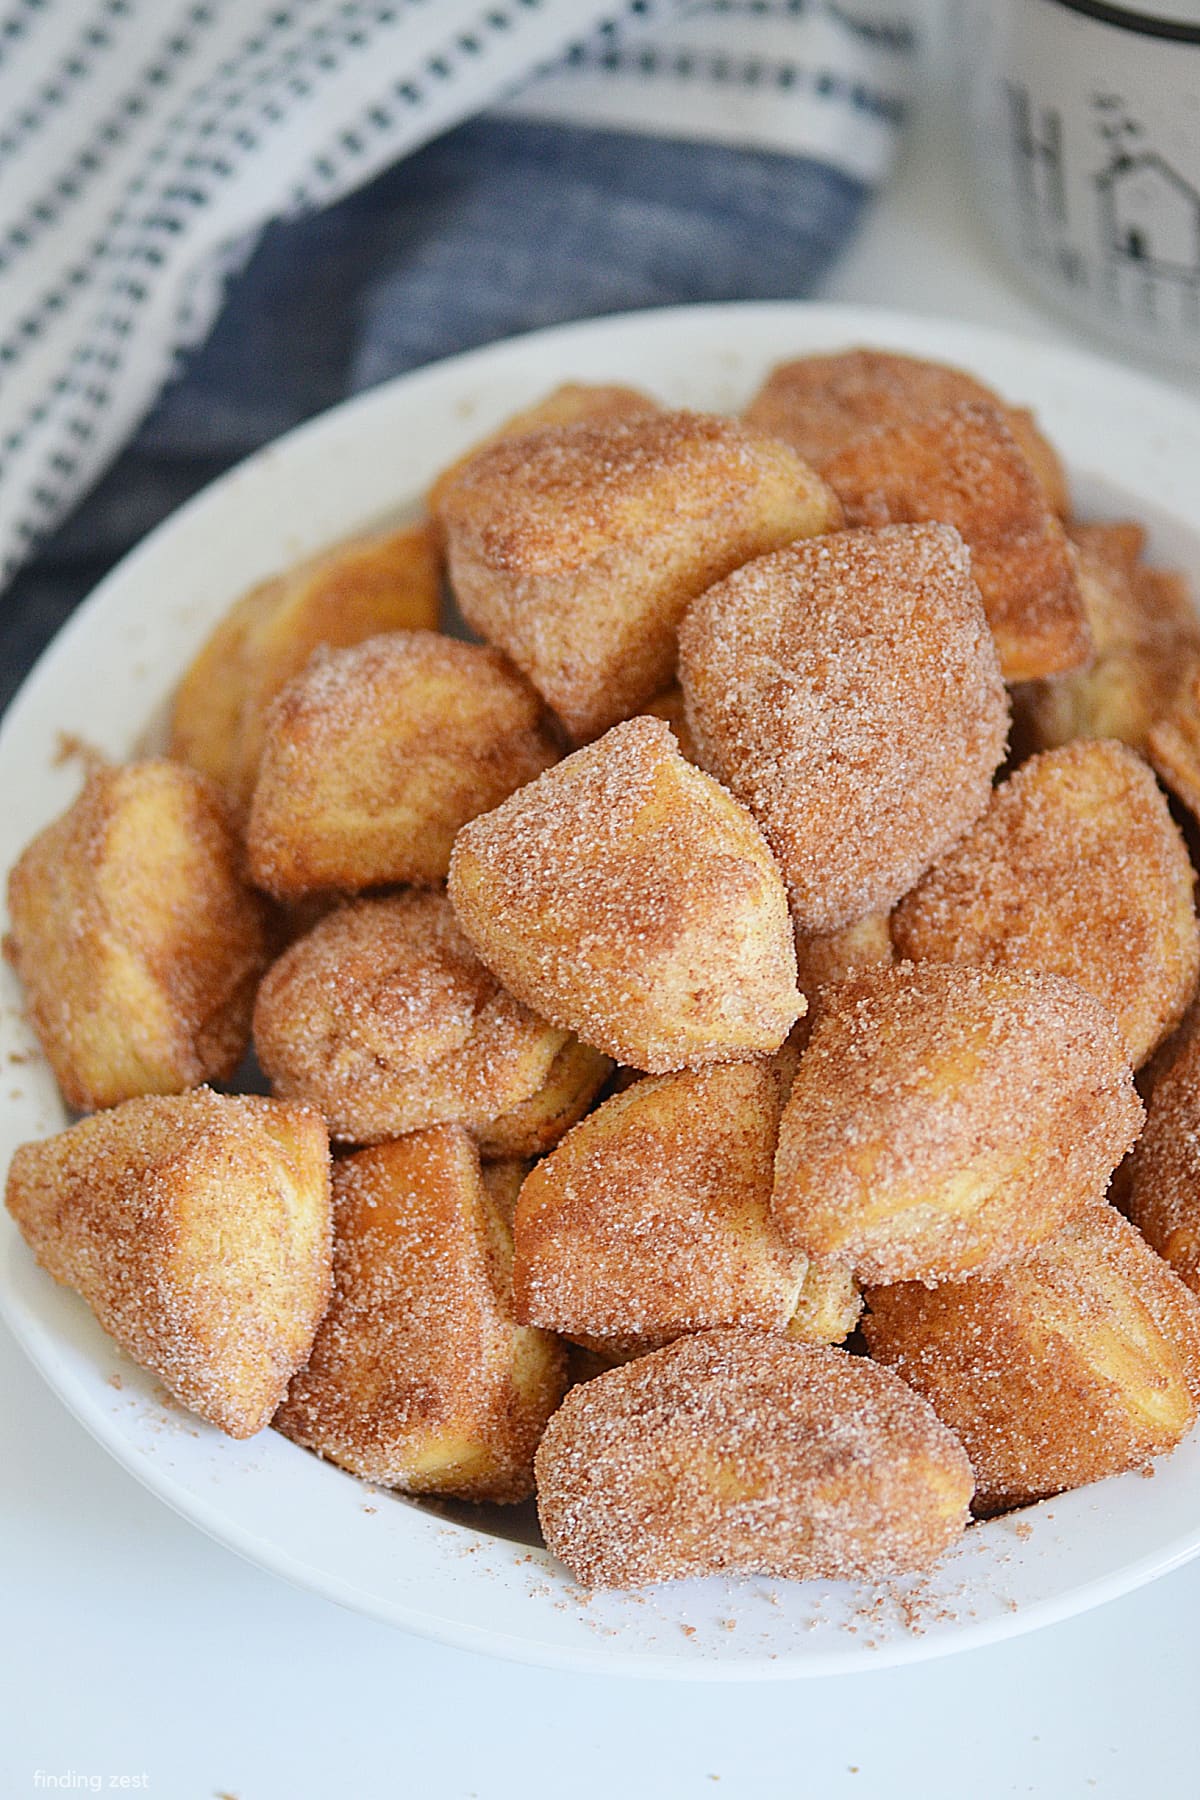 Air Fryer Donut Holes are so easy to make and taste delicious. You can use canned biscuits for a quick and easy donut that tastes great every day or on special occasions. Dust them with cinnamon and sugar for a sweet treat everyone will love.